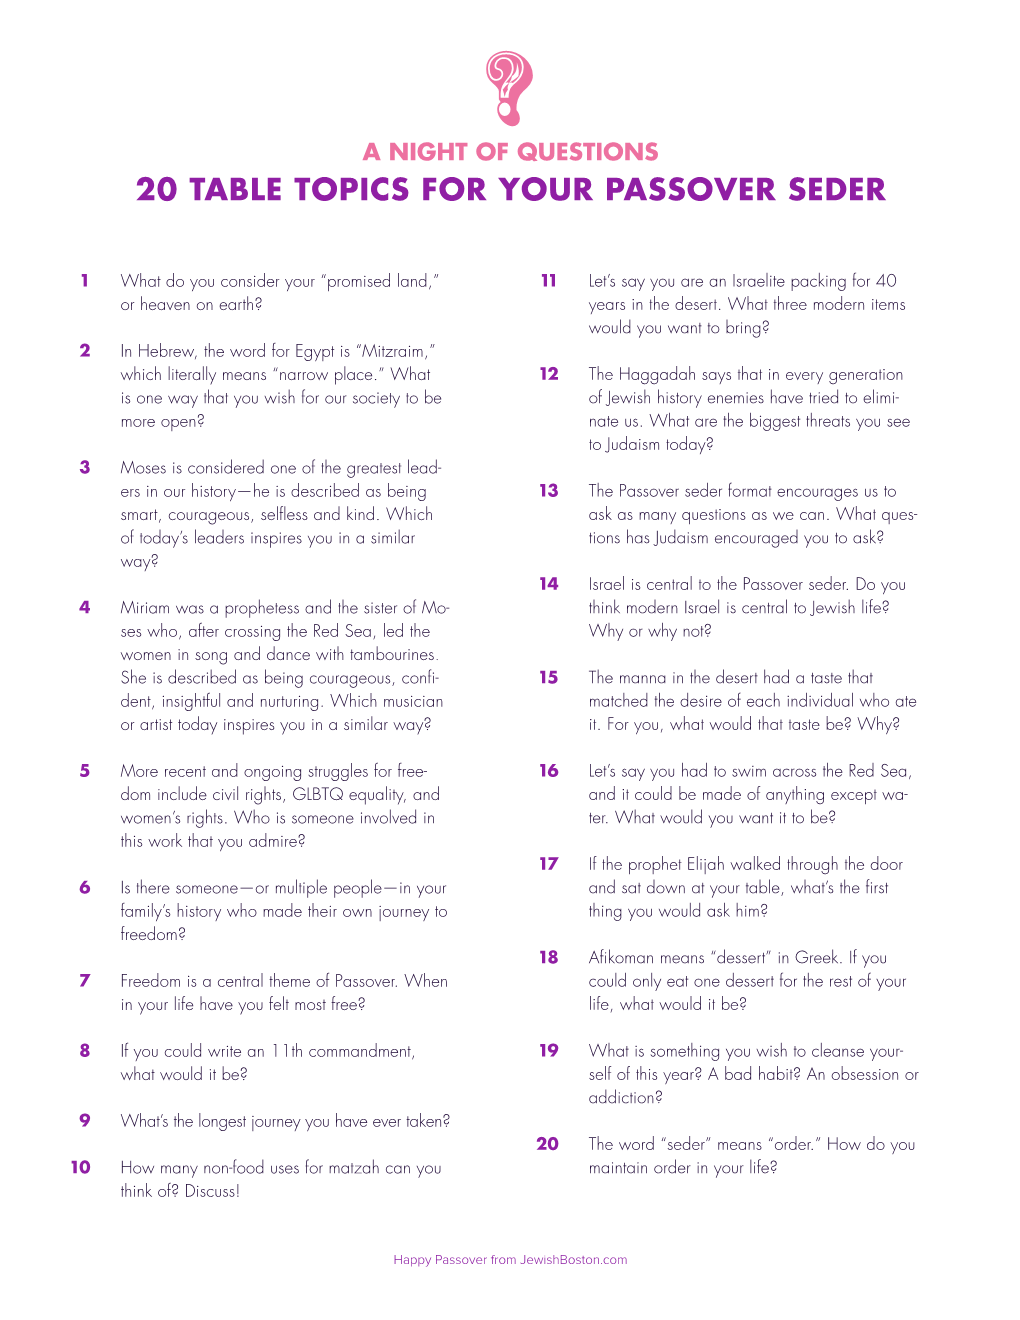 20 Table Topics for Your Passover Seder